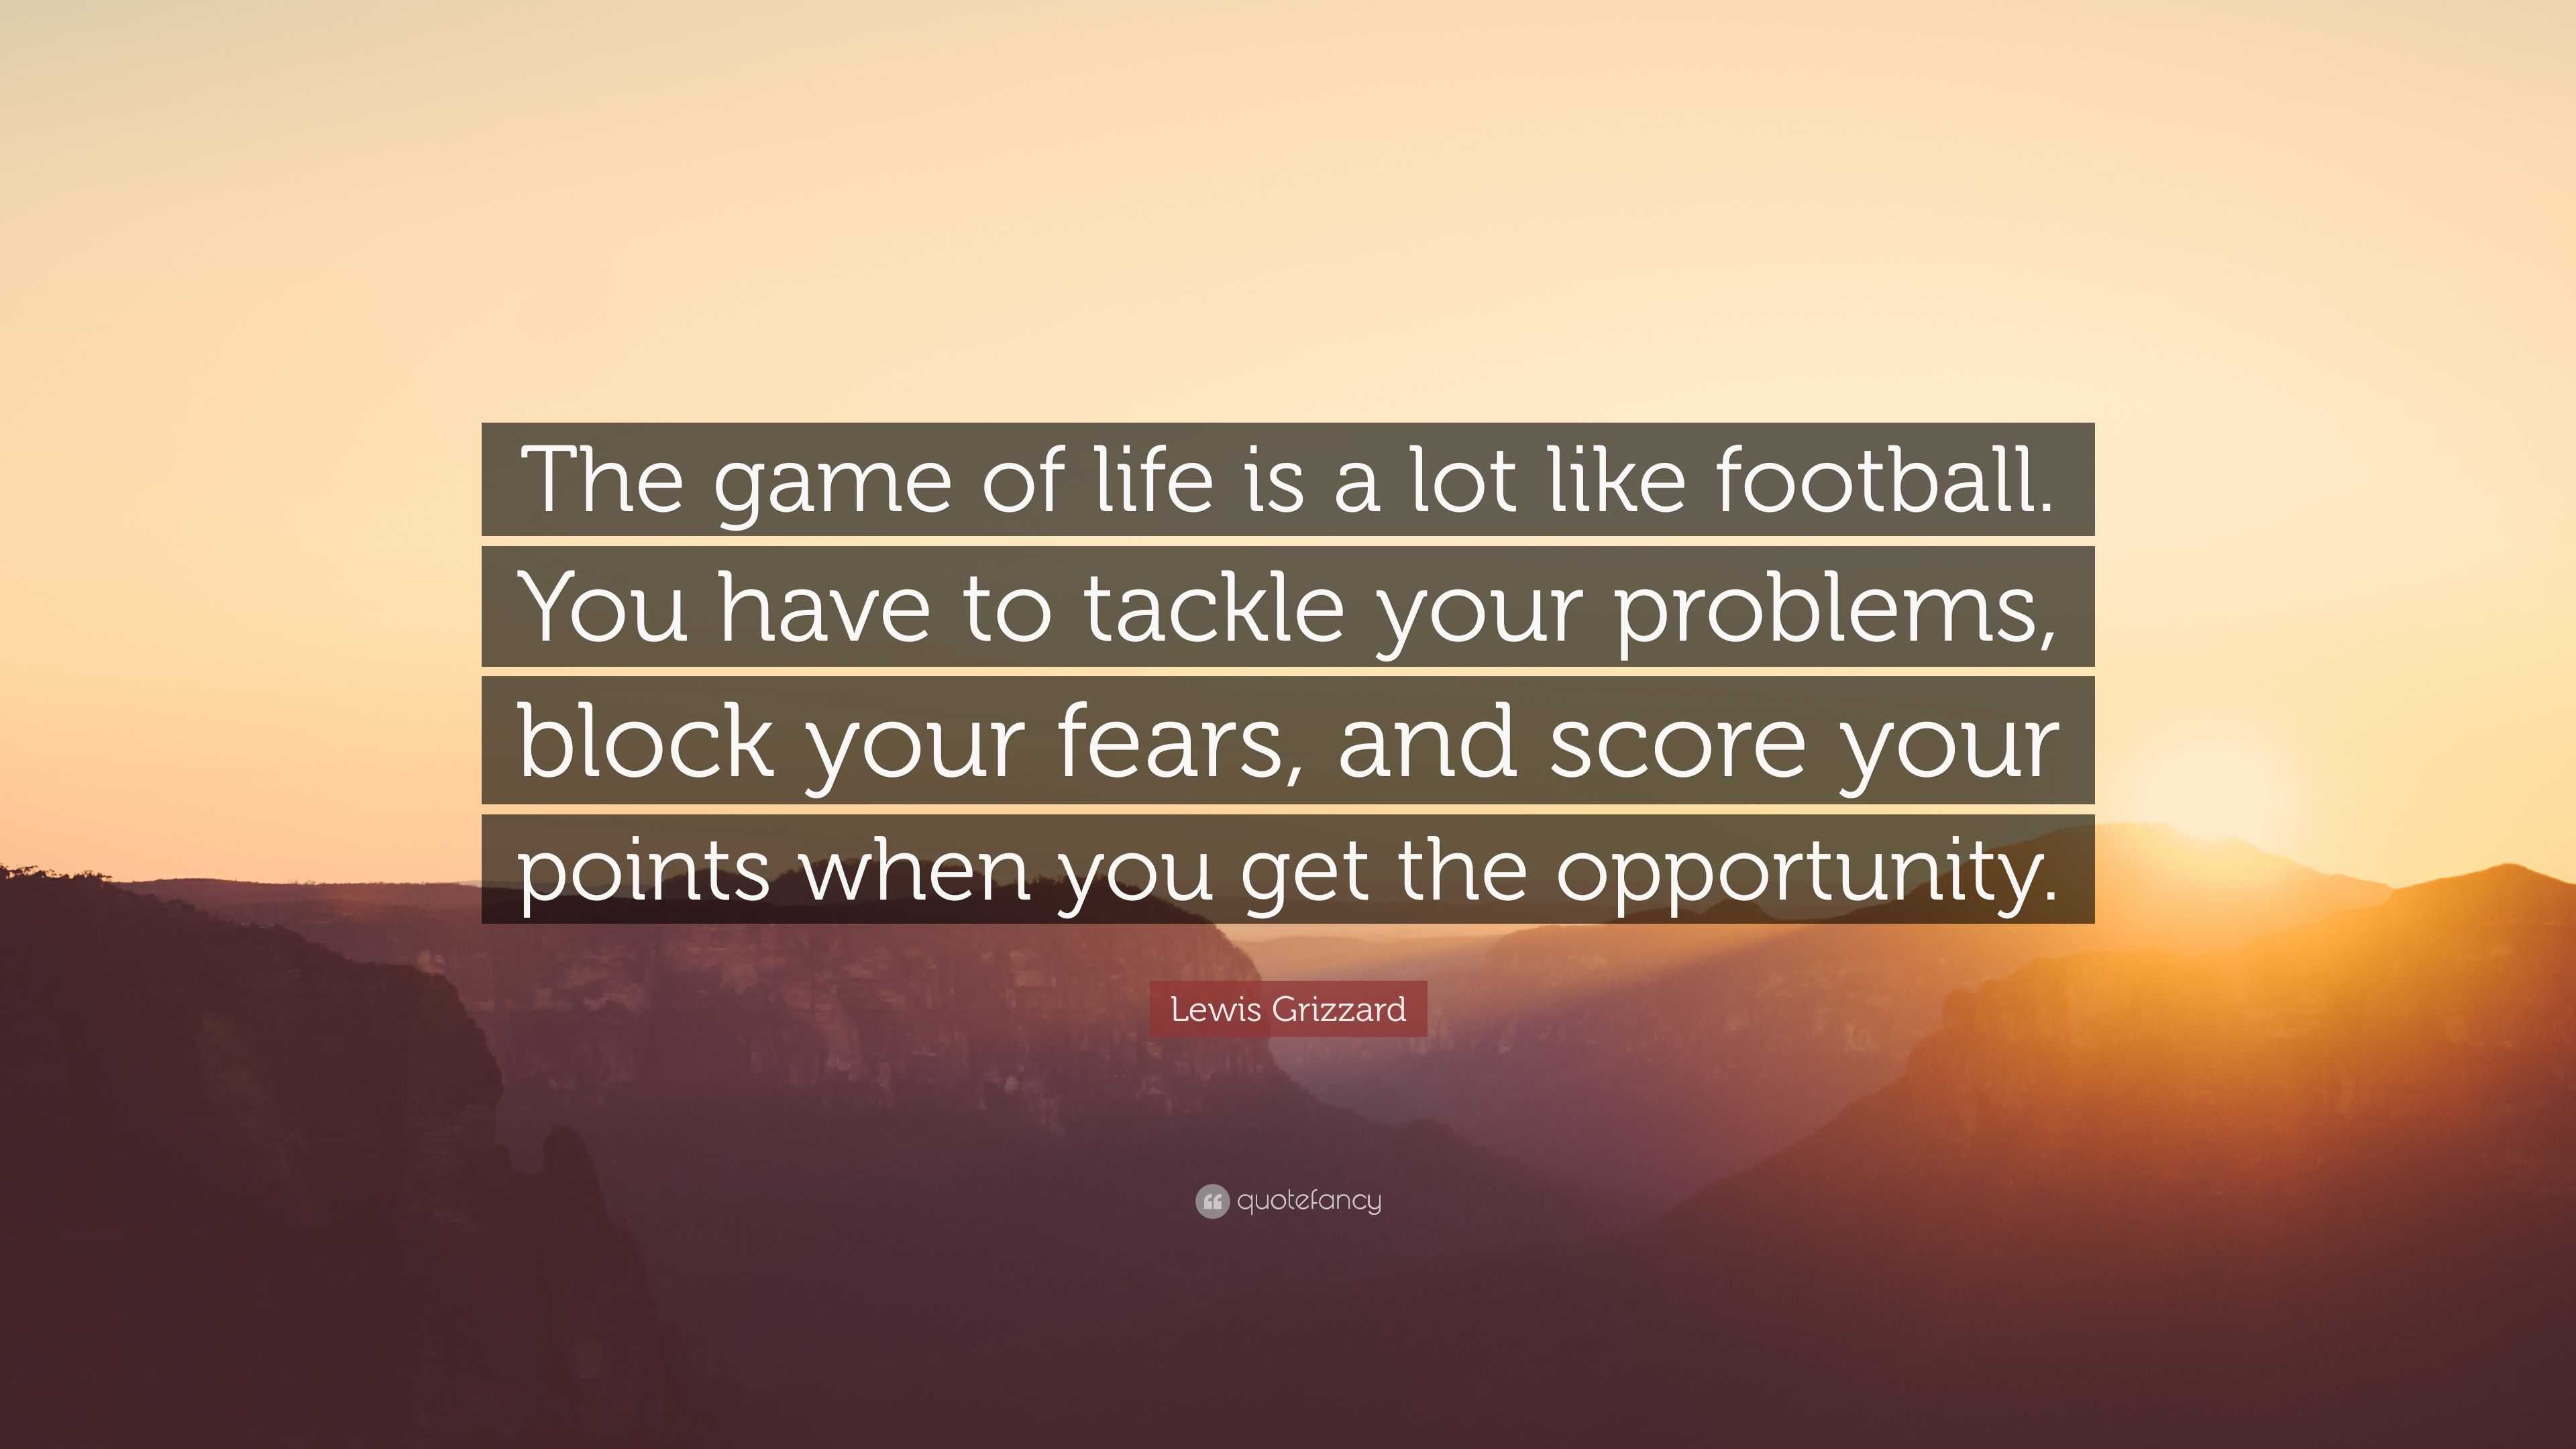 My life is like a football game- when i feel - Quote